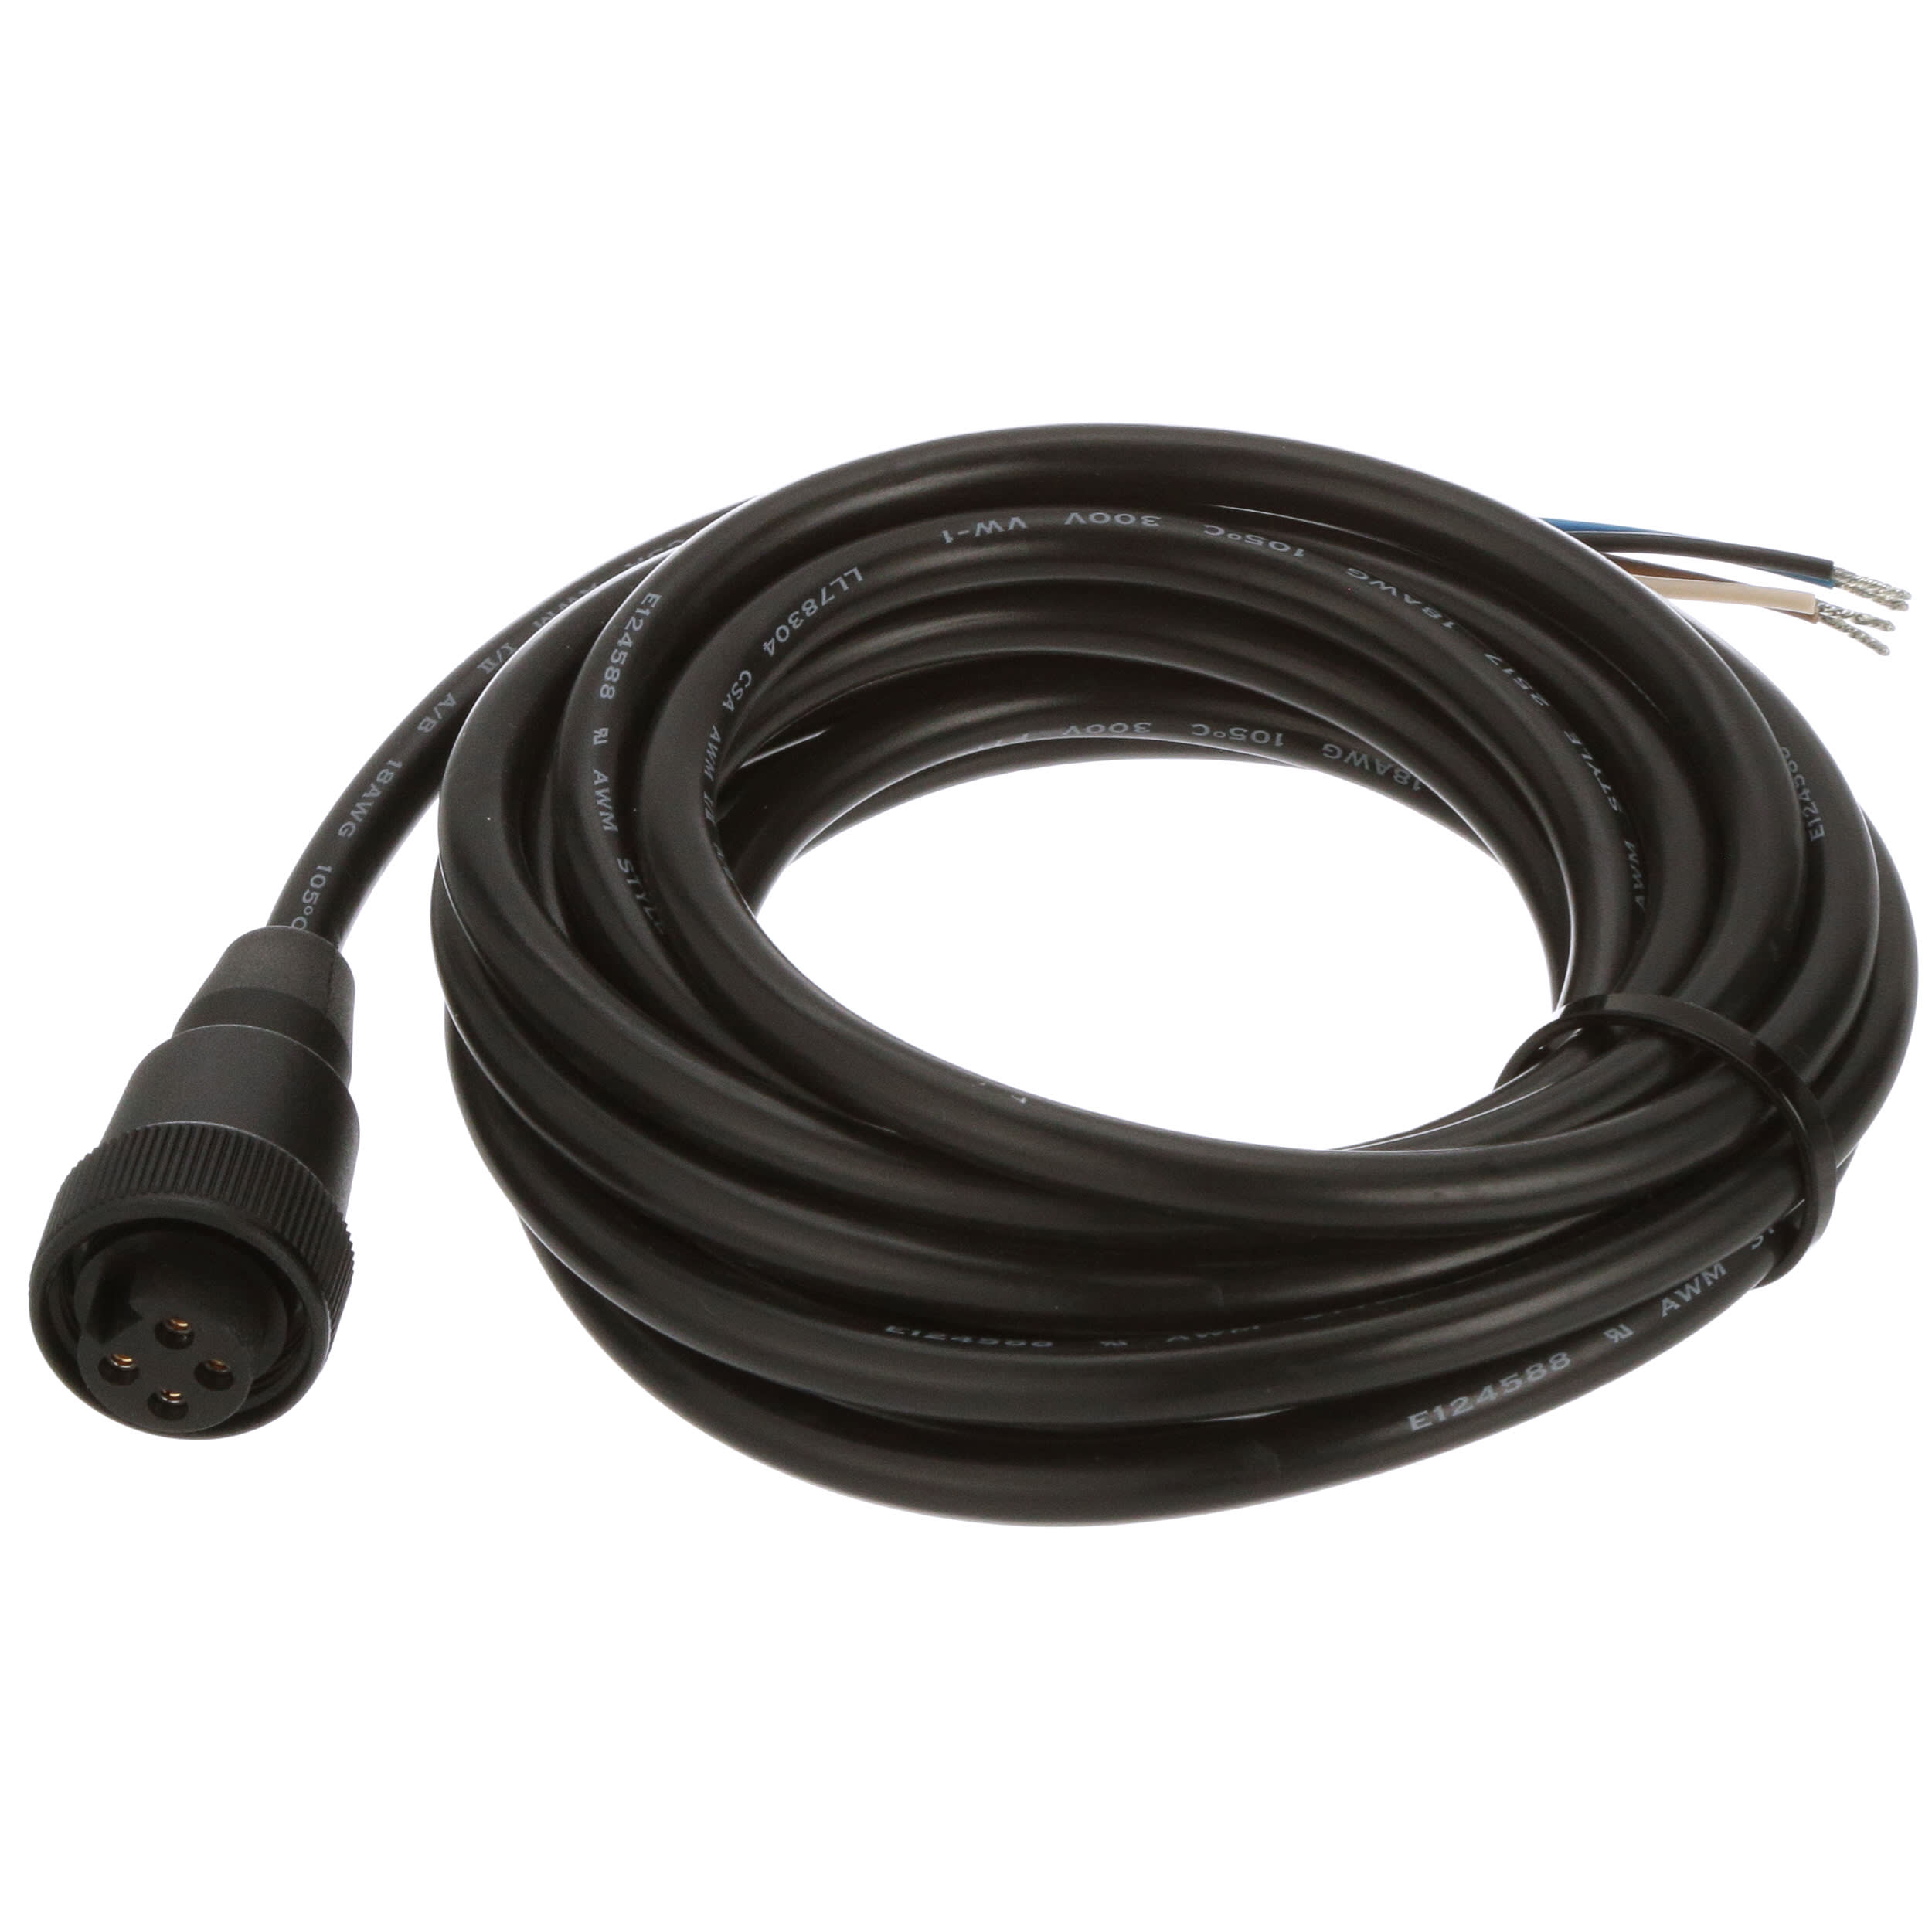 BANNER MBCC-412 CABLE New